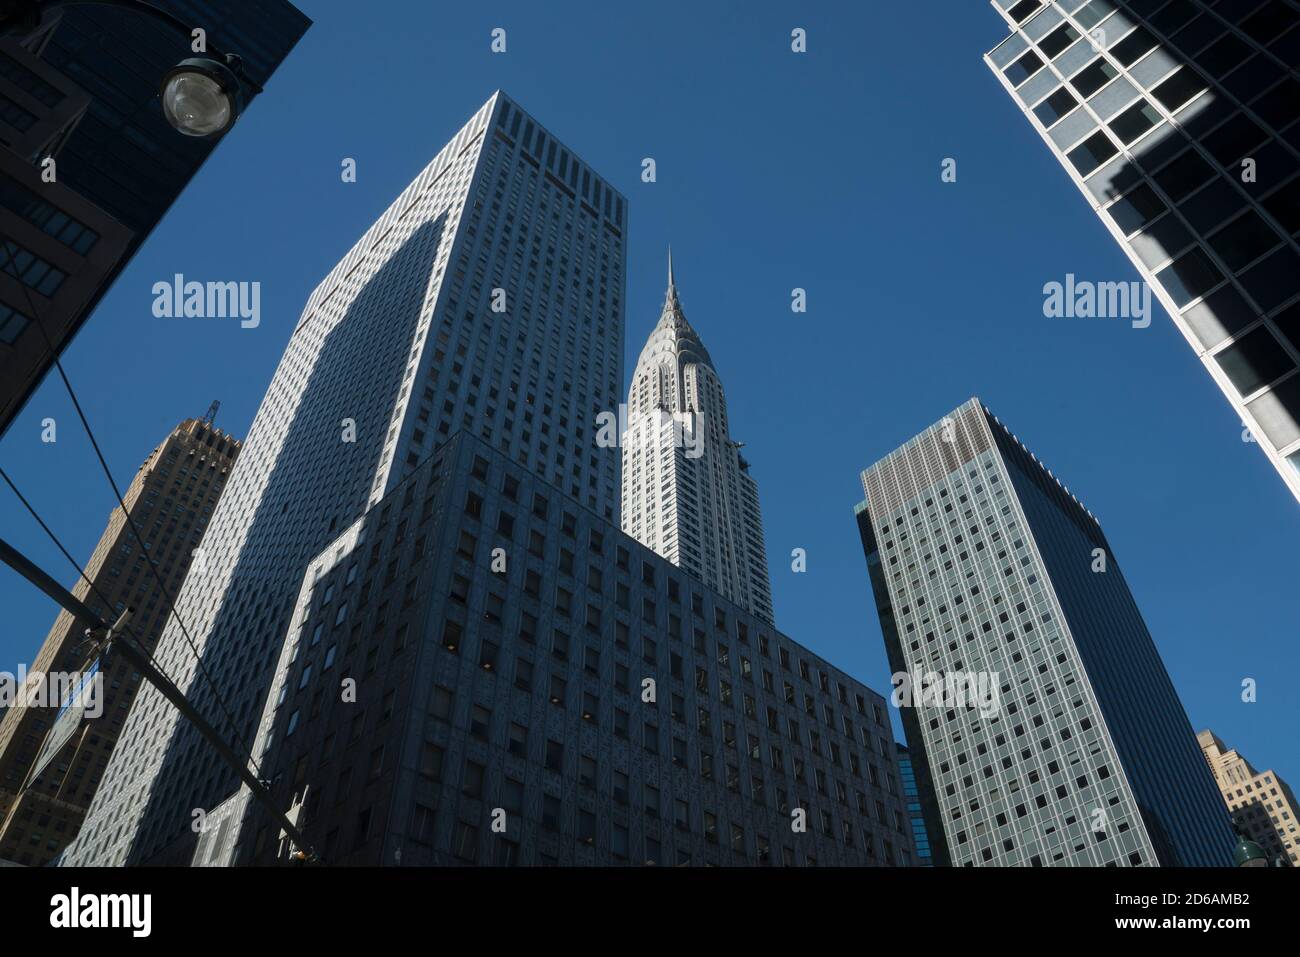 The landmarked Chrysler Building and other skyscrapers of midtown Manhattan. Oct. 14, 2020 Stock Photo